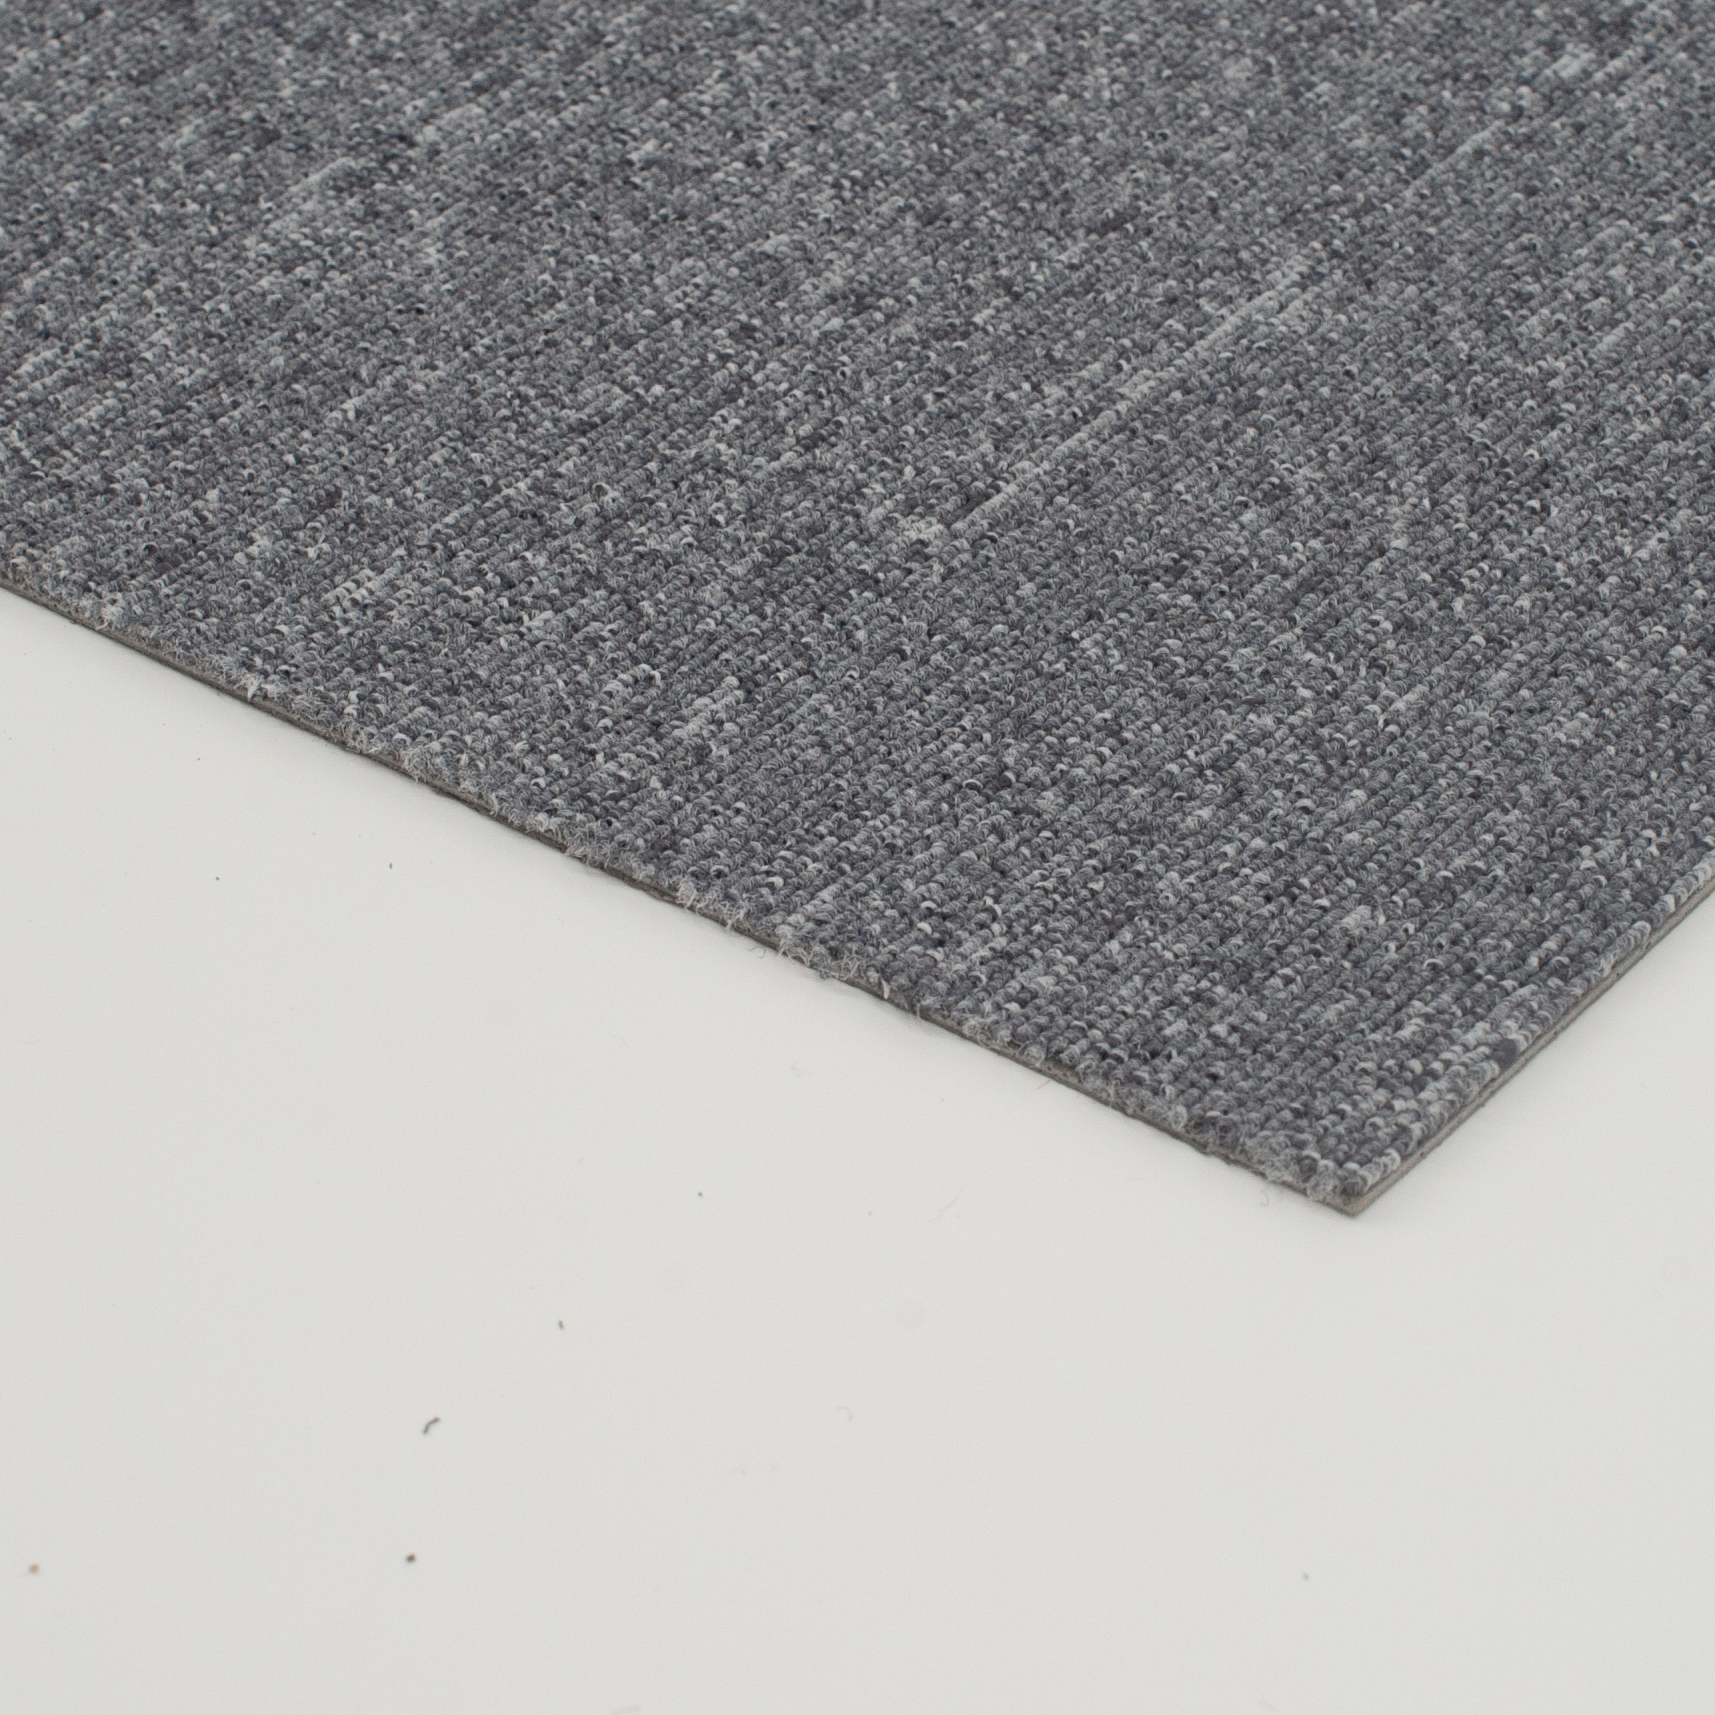 Edging Recyclable Colorful Carpet Tiles